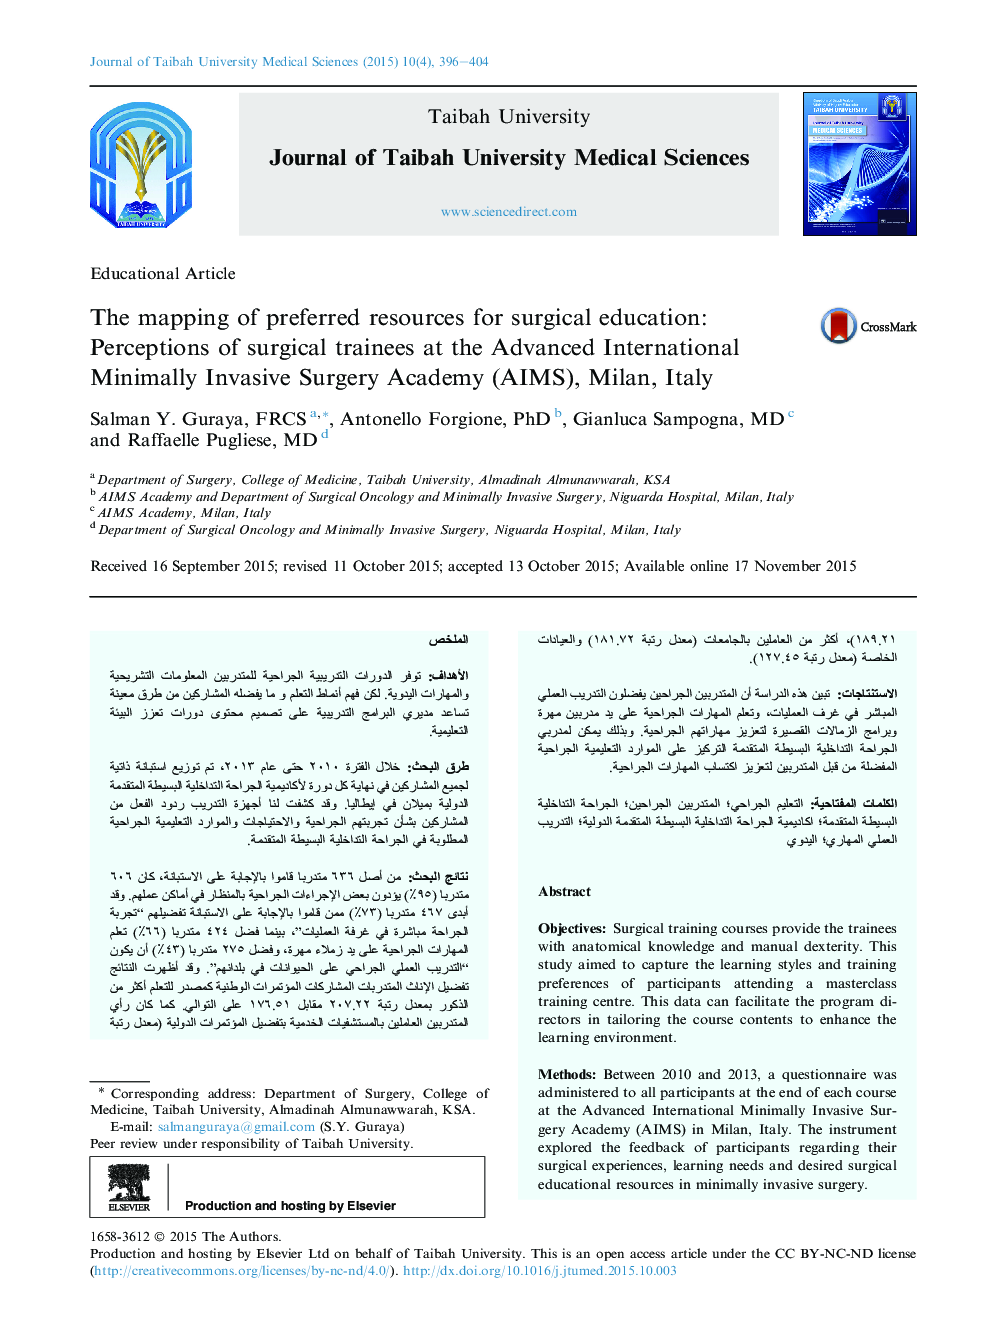 The mapping of preferred resources for surgical education: Perceptions of surgical trainees at the Advanced International Minimally Invasive Surgery Academy (AIMS), Milan, Italy 